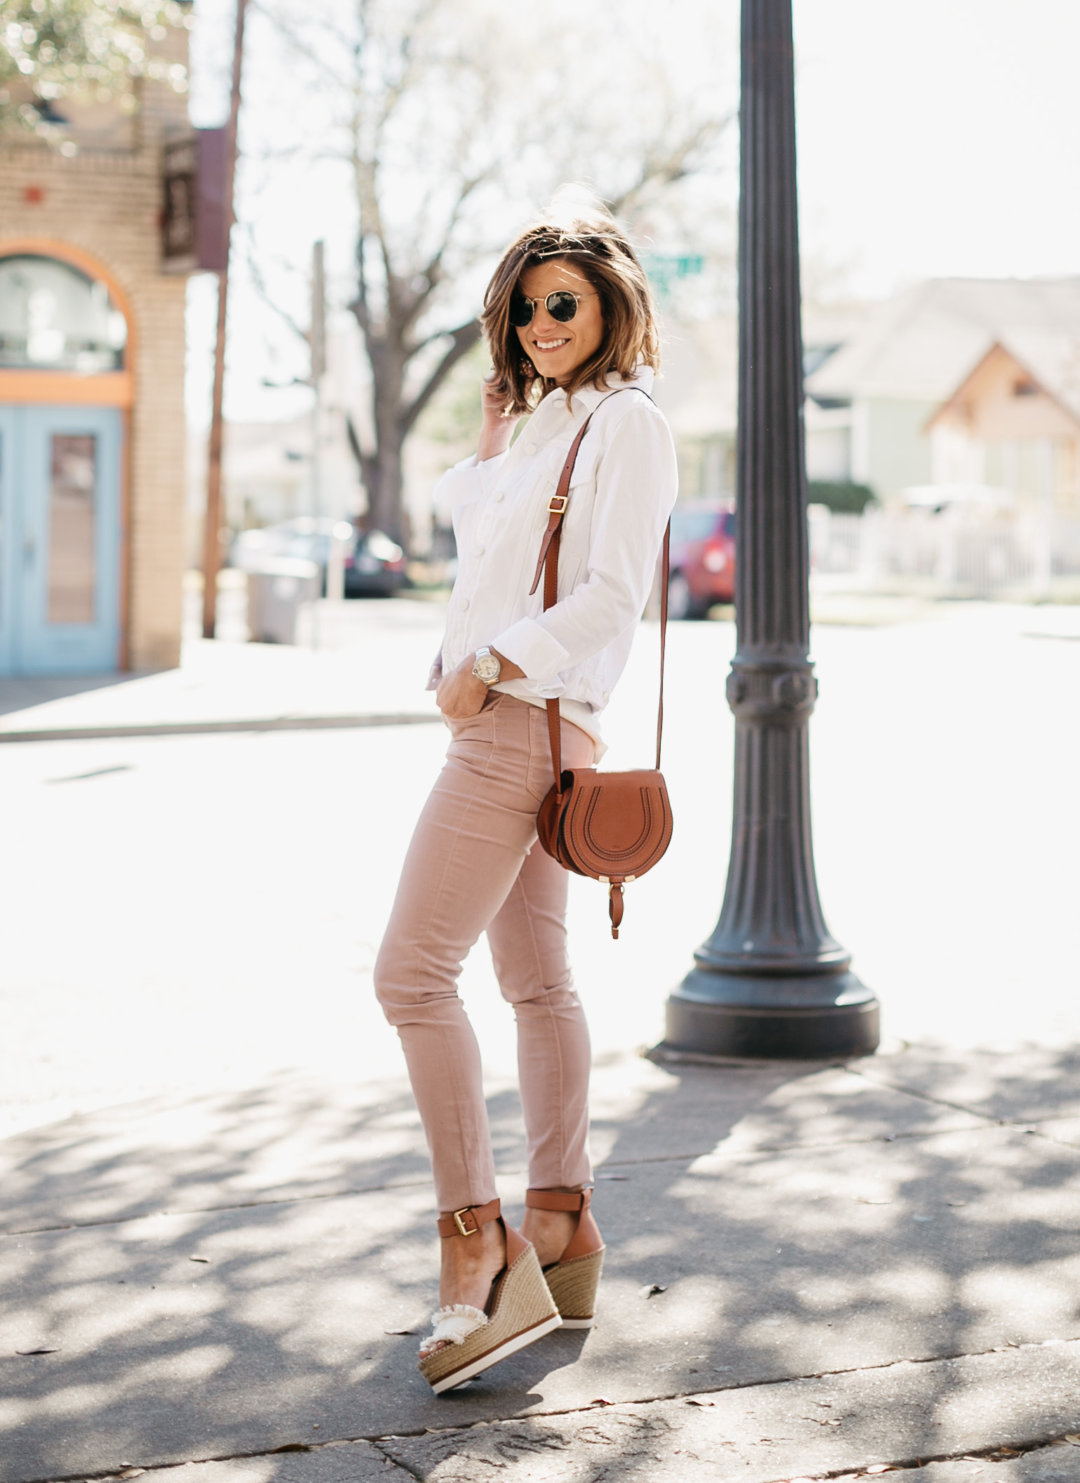 Dressing for Spring When It's Still Cold: Transitional Style